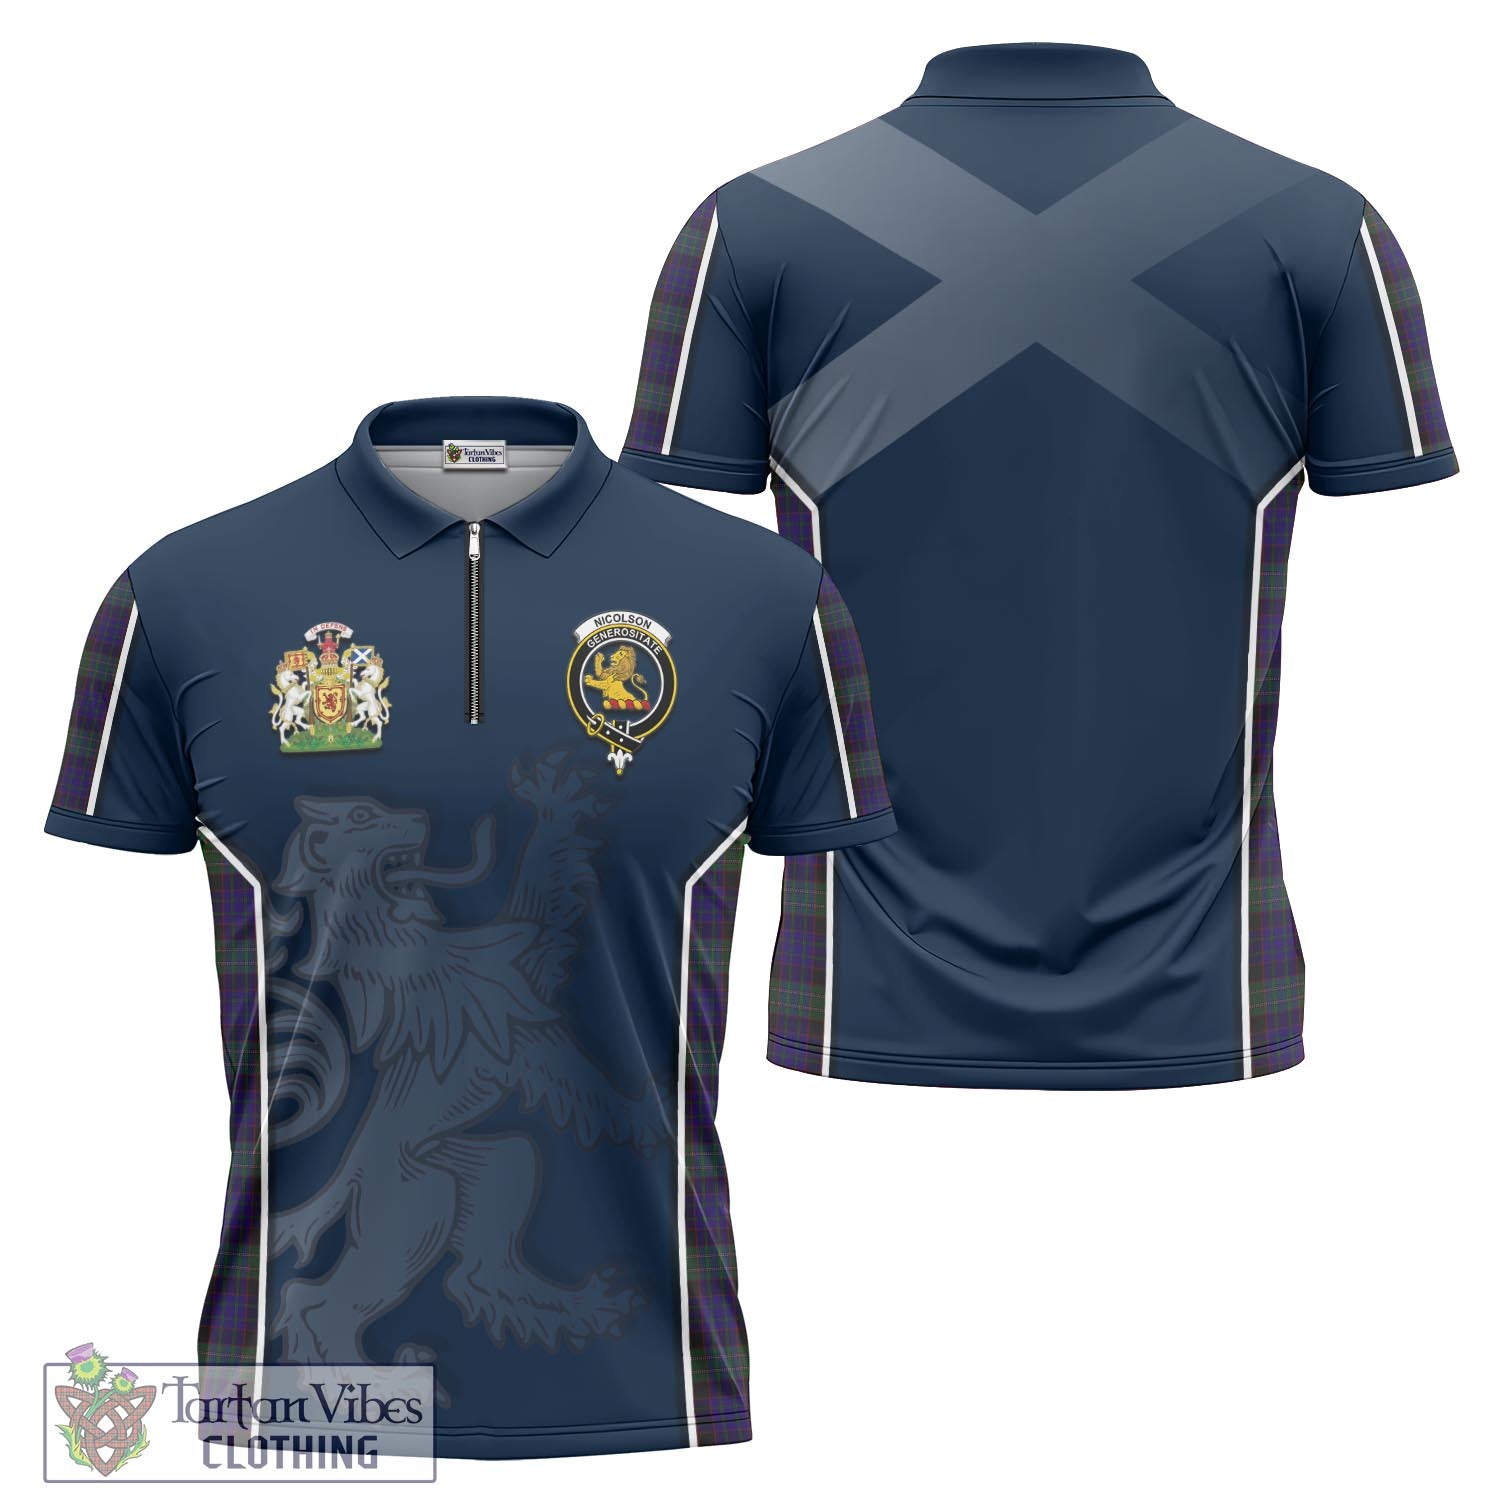 Tartan Vibes Clothing Nicolson Green Hunting Tartan Zipper Polo Shirt with Family Crest and Lion Rampant Vibes Sport Style